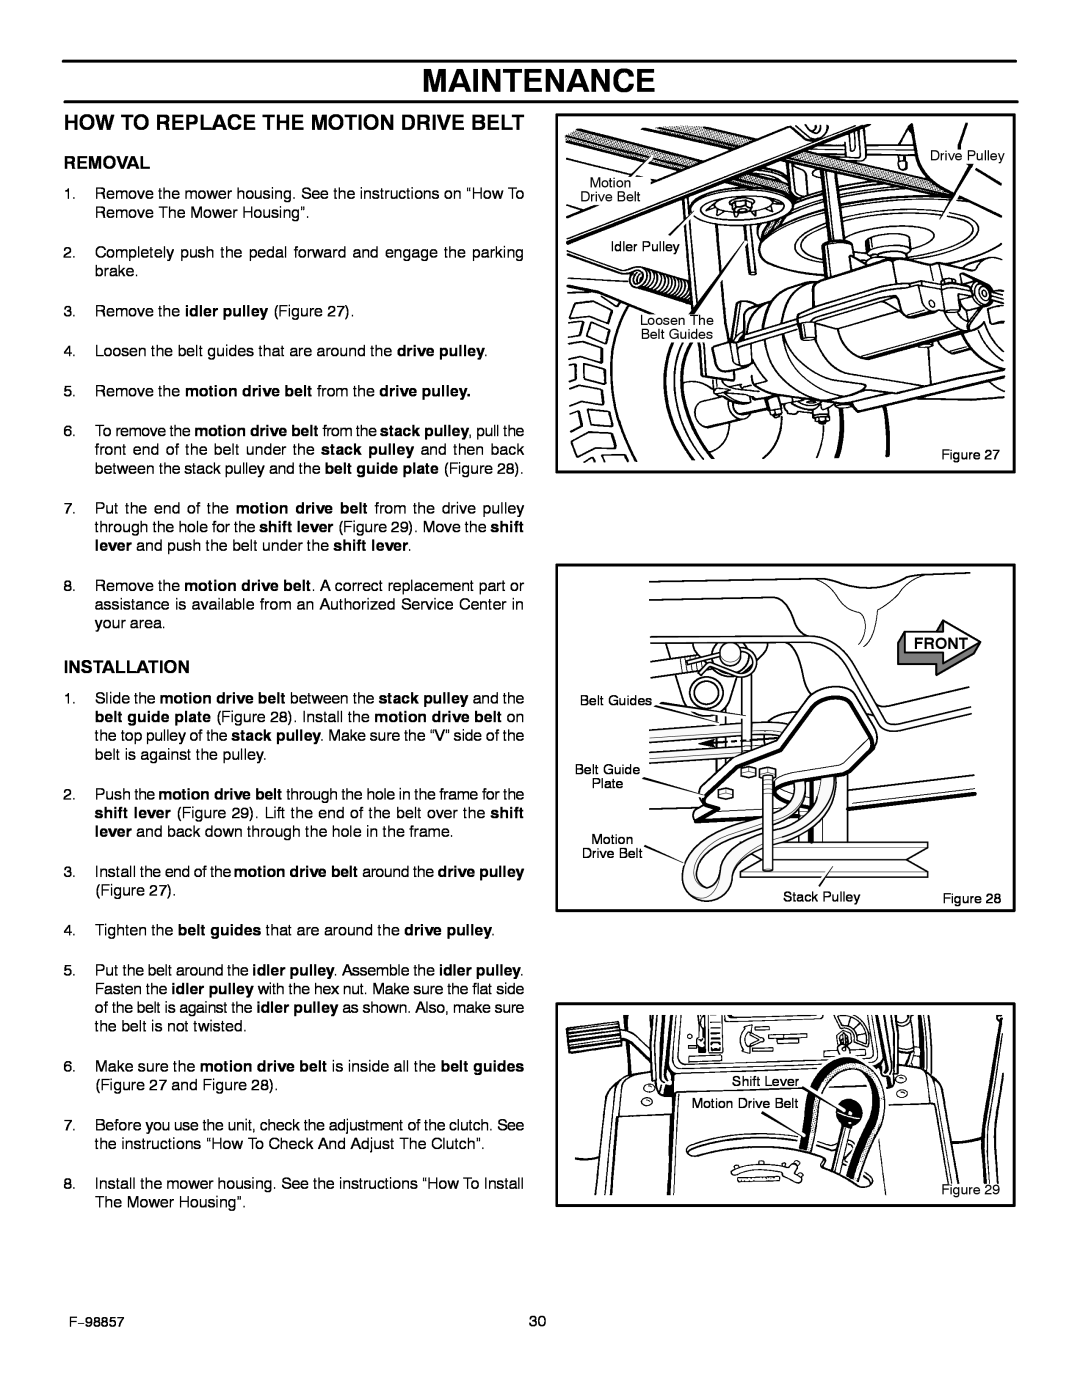 Hayter Mowers 30-Dec manual How To Replace The Motion Drive Belt, Maintenance, Removal, Installation 